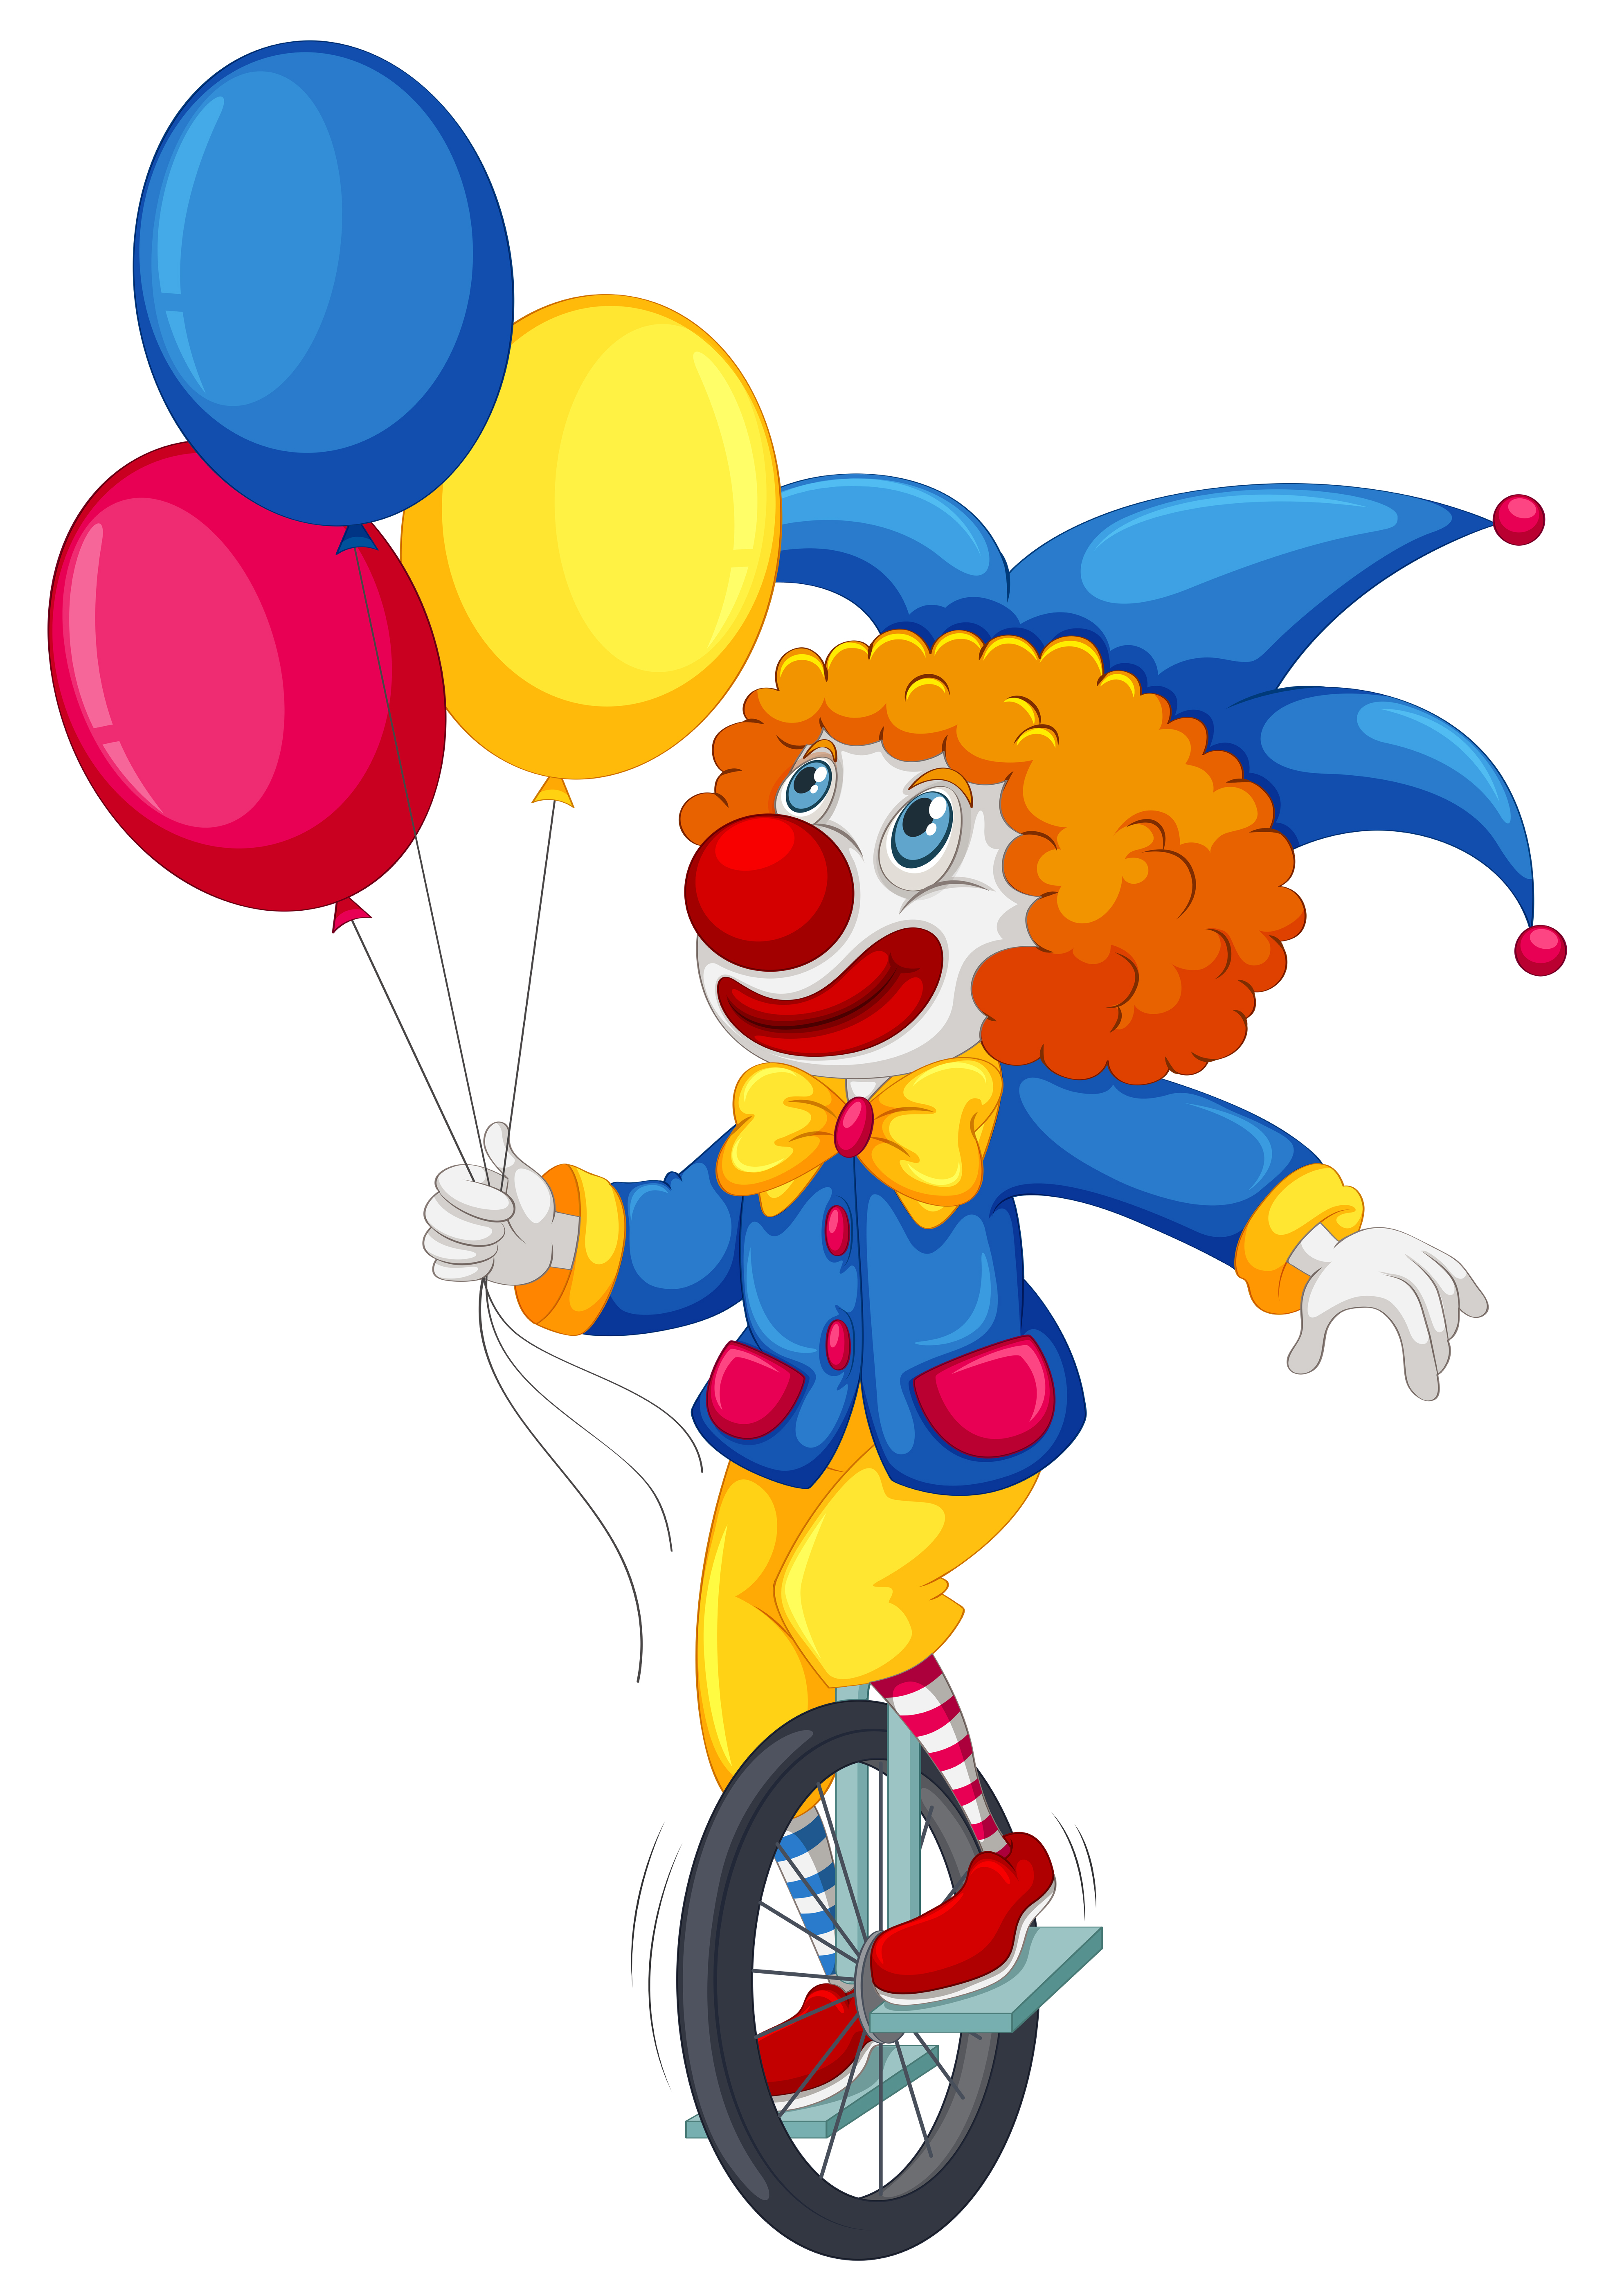 A clown riding a unicycle - Download Free Vectors, Clipart ...